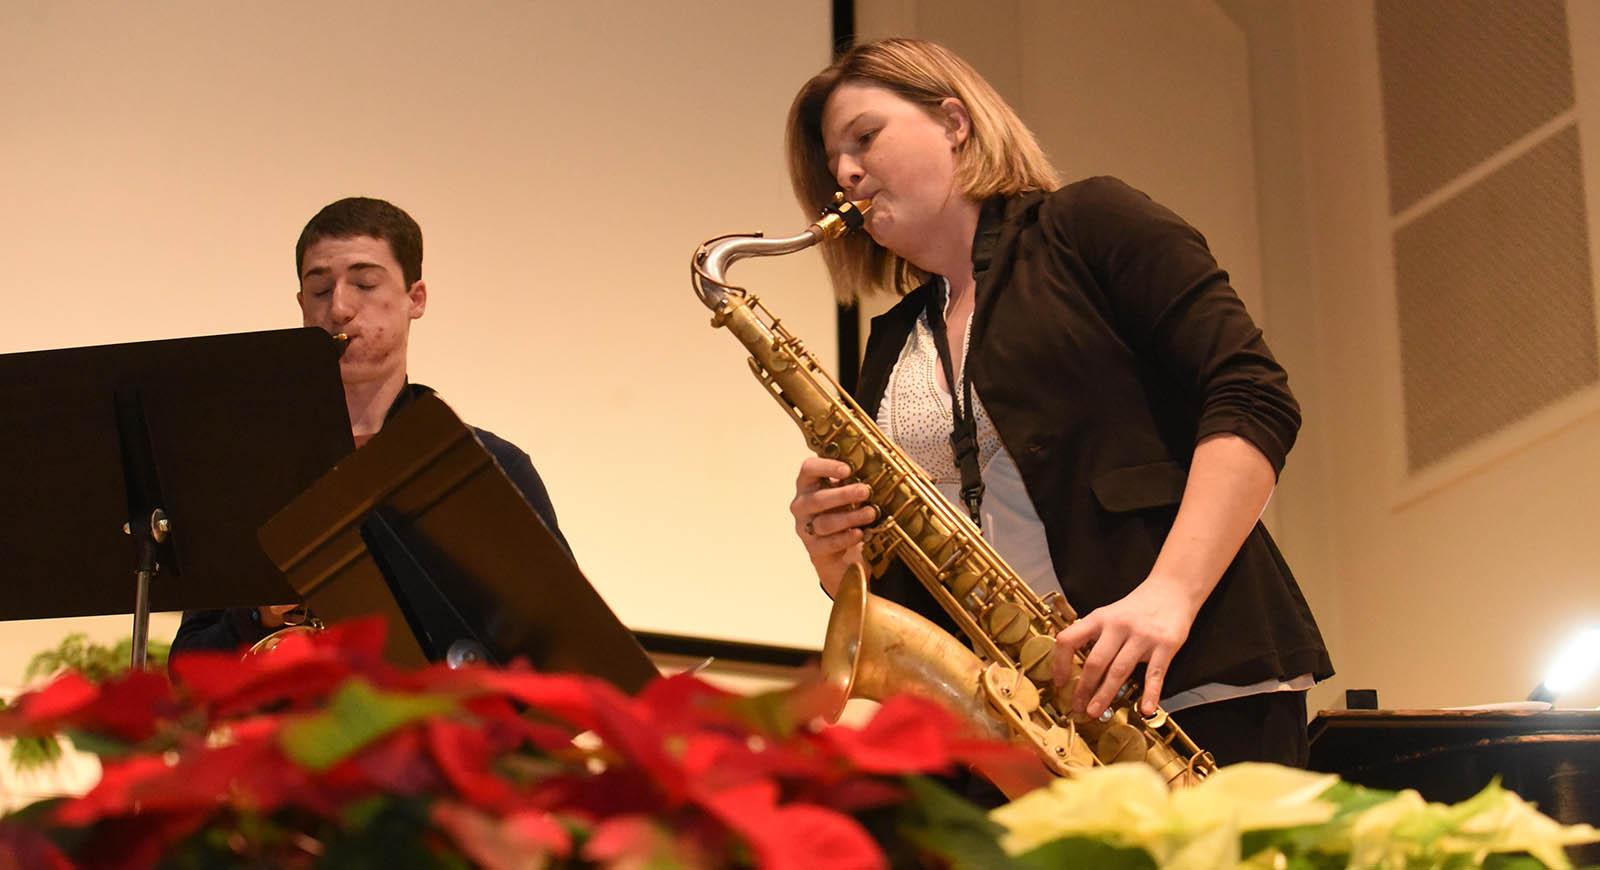 Photo of a woman playing a saxophone with poinsettas in the foreground